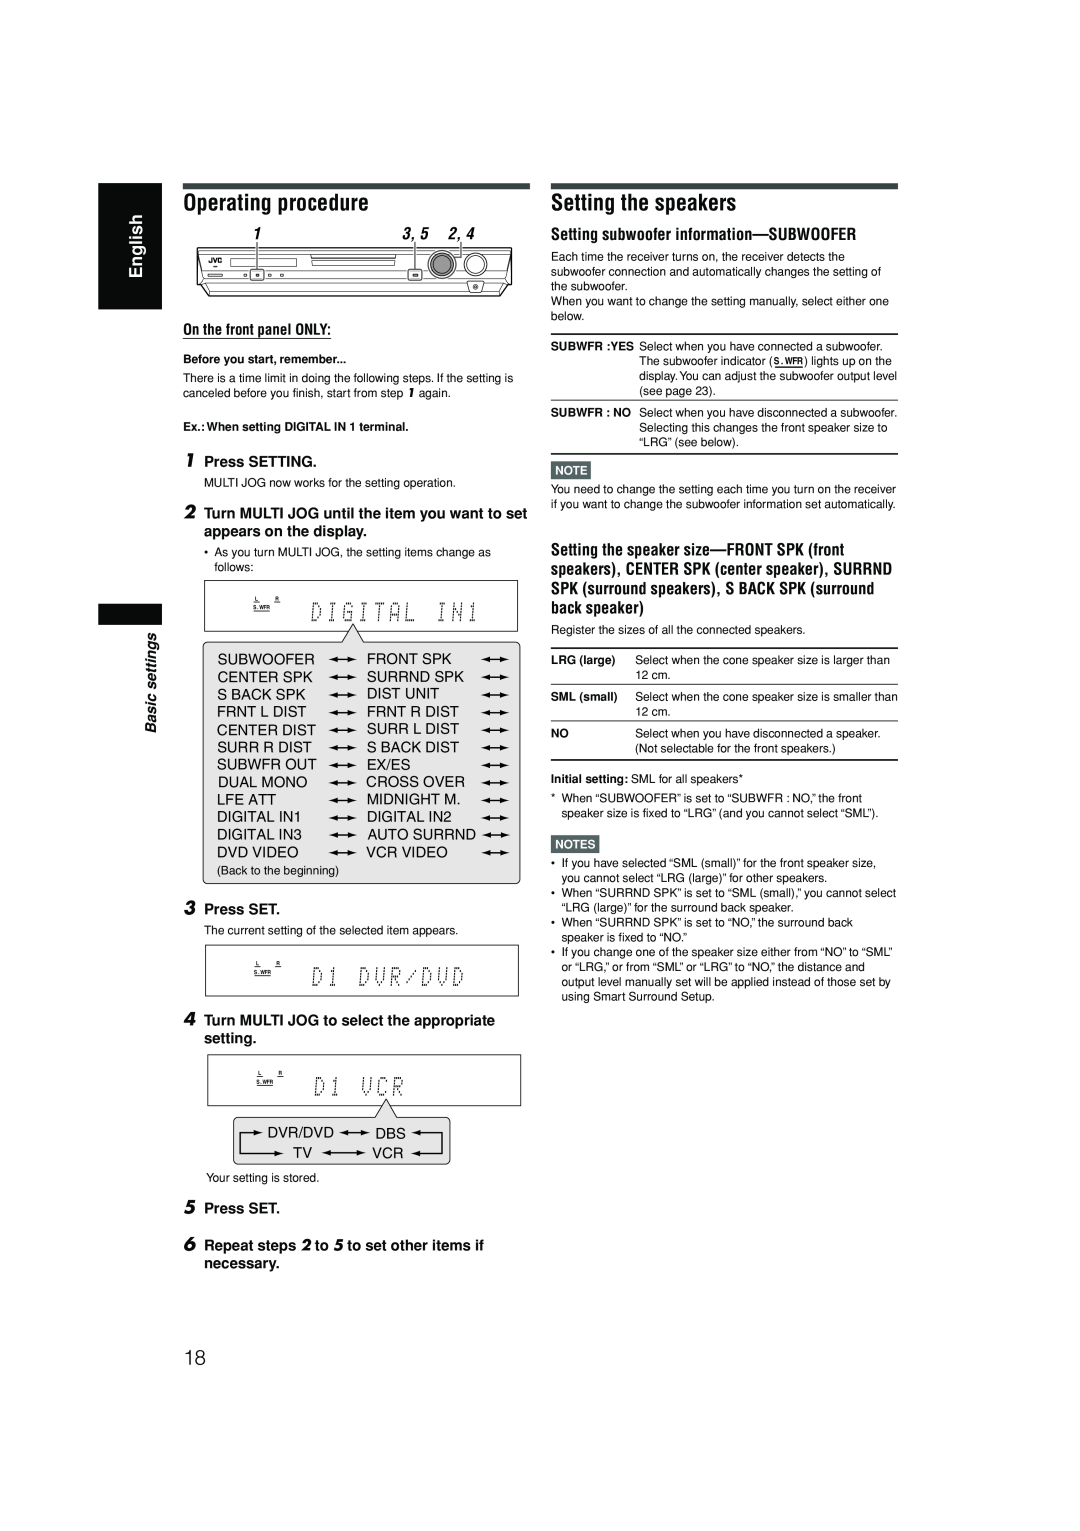 JVC RX-F10S Operating procedure, Setting the speakers, English, Setting subwoofer information—SUBWOOFER, Basic settings 